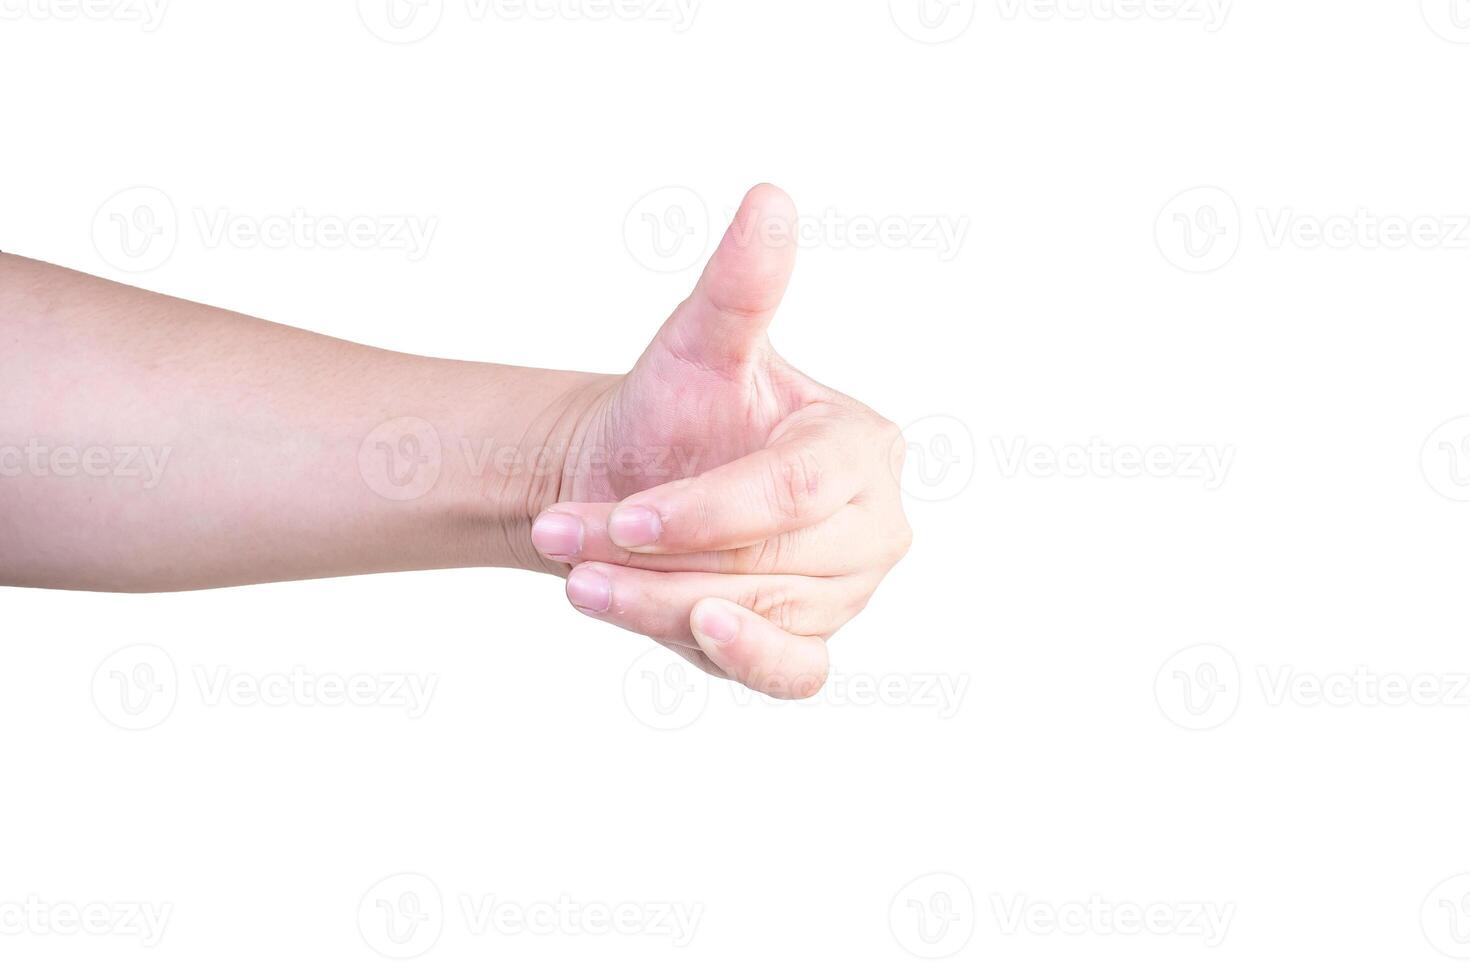 hand on isolated background clipping path photo